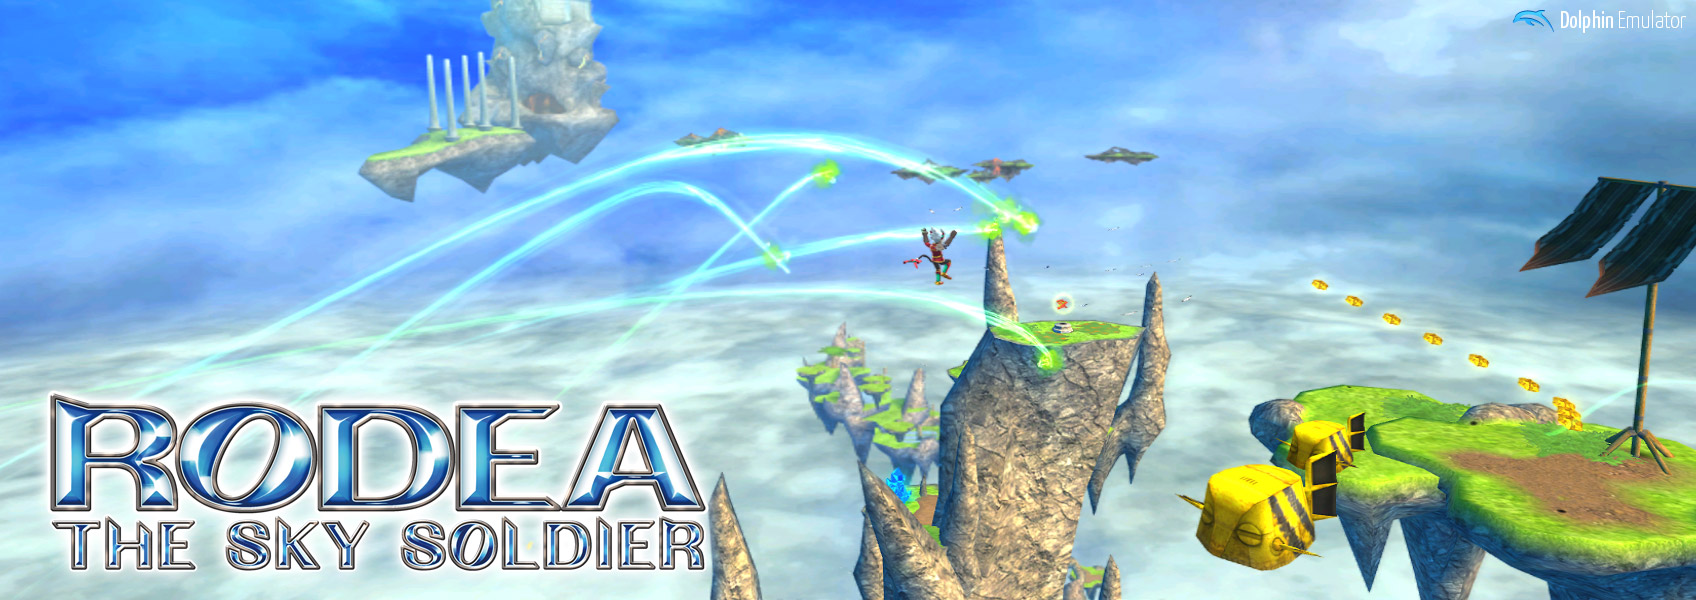 rodea the sky soldier 3ds